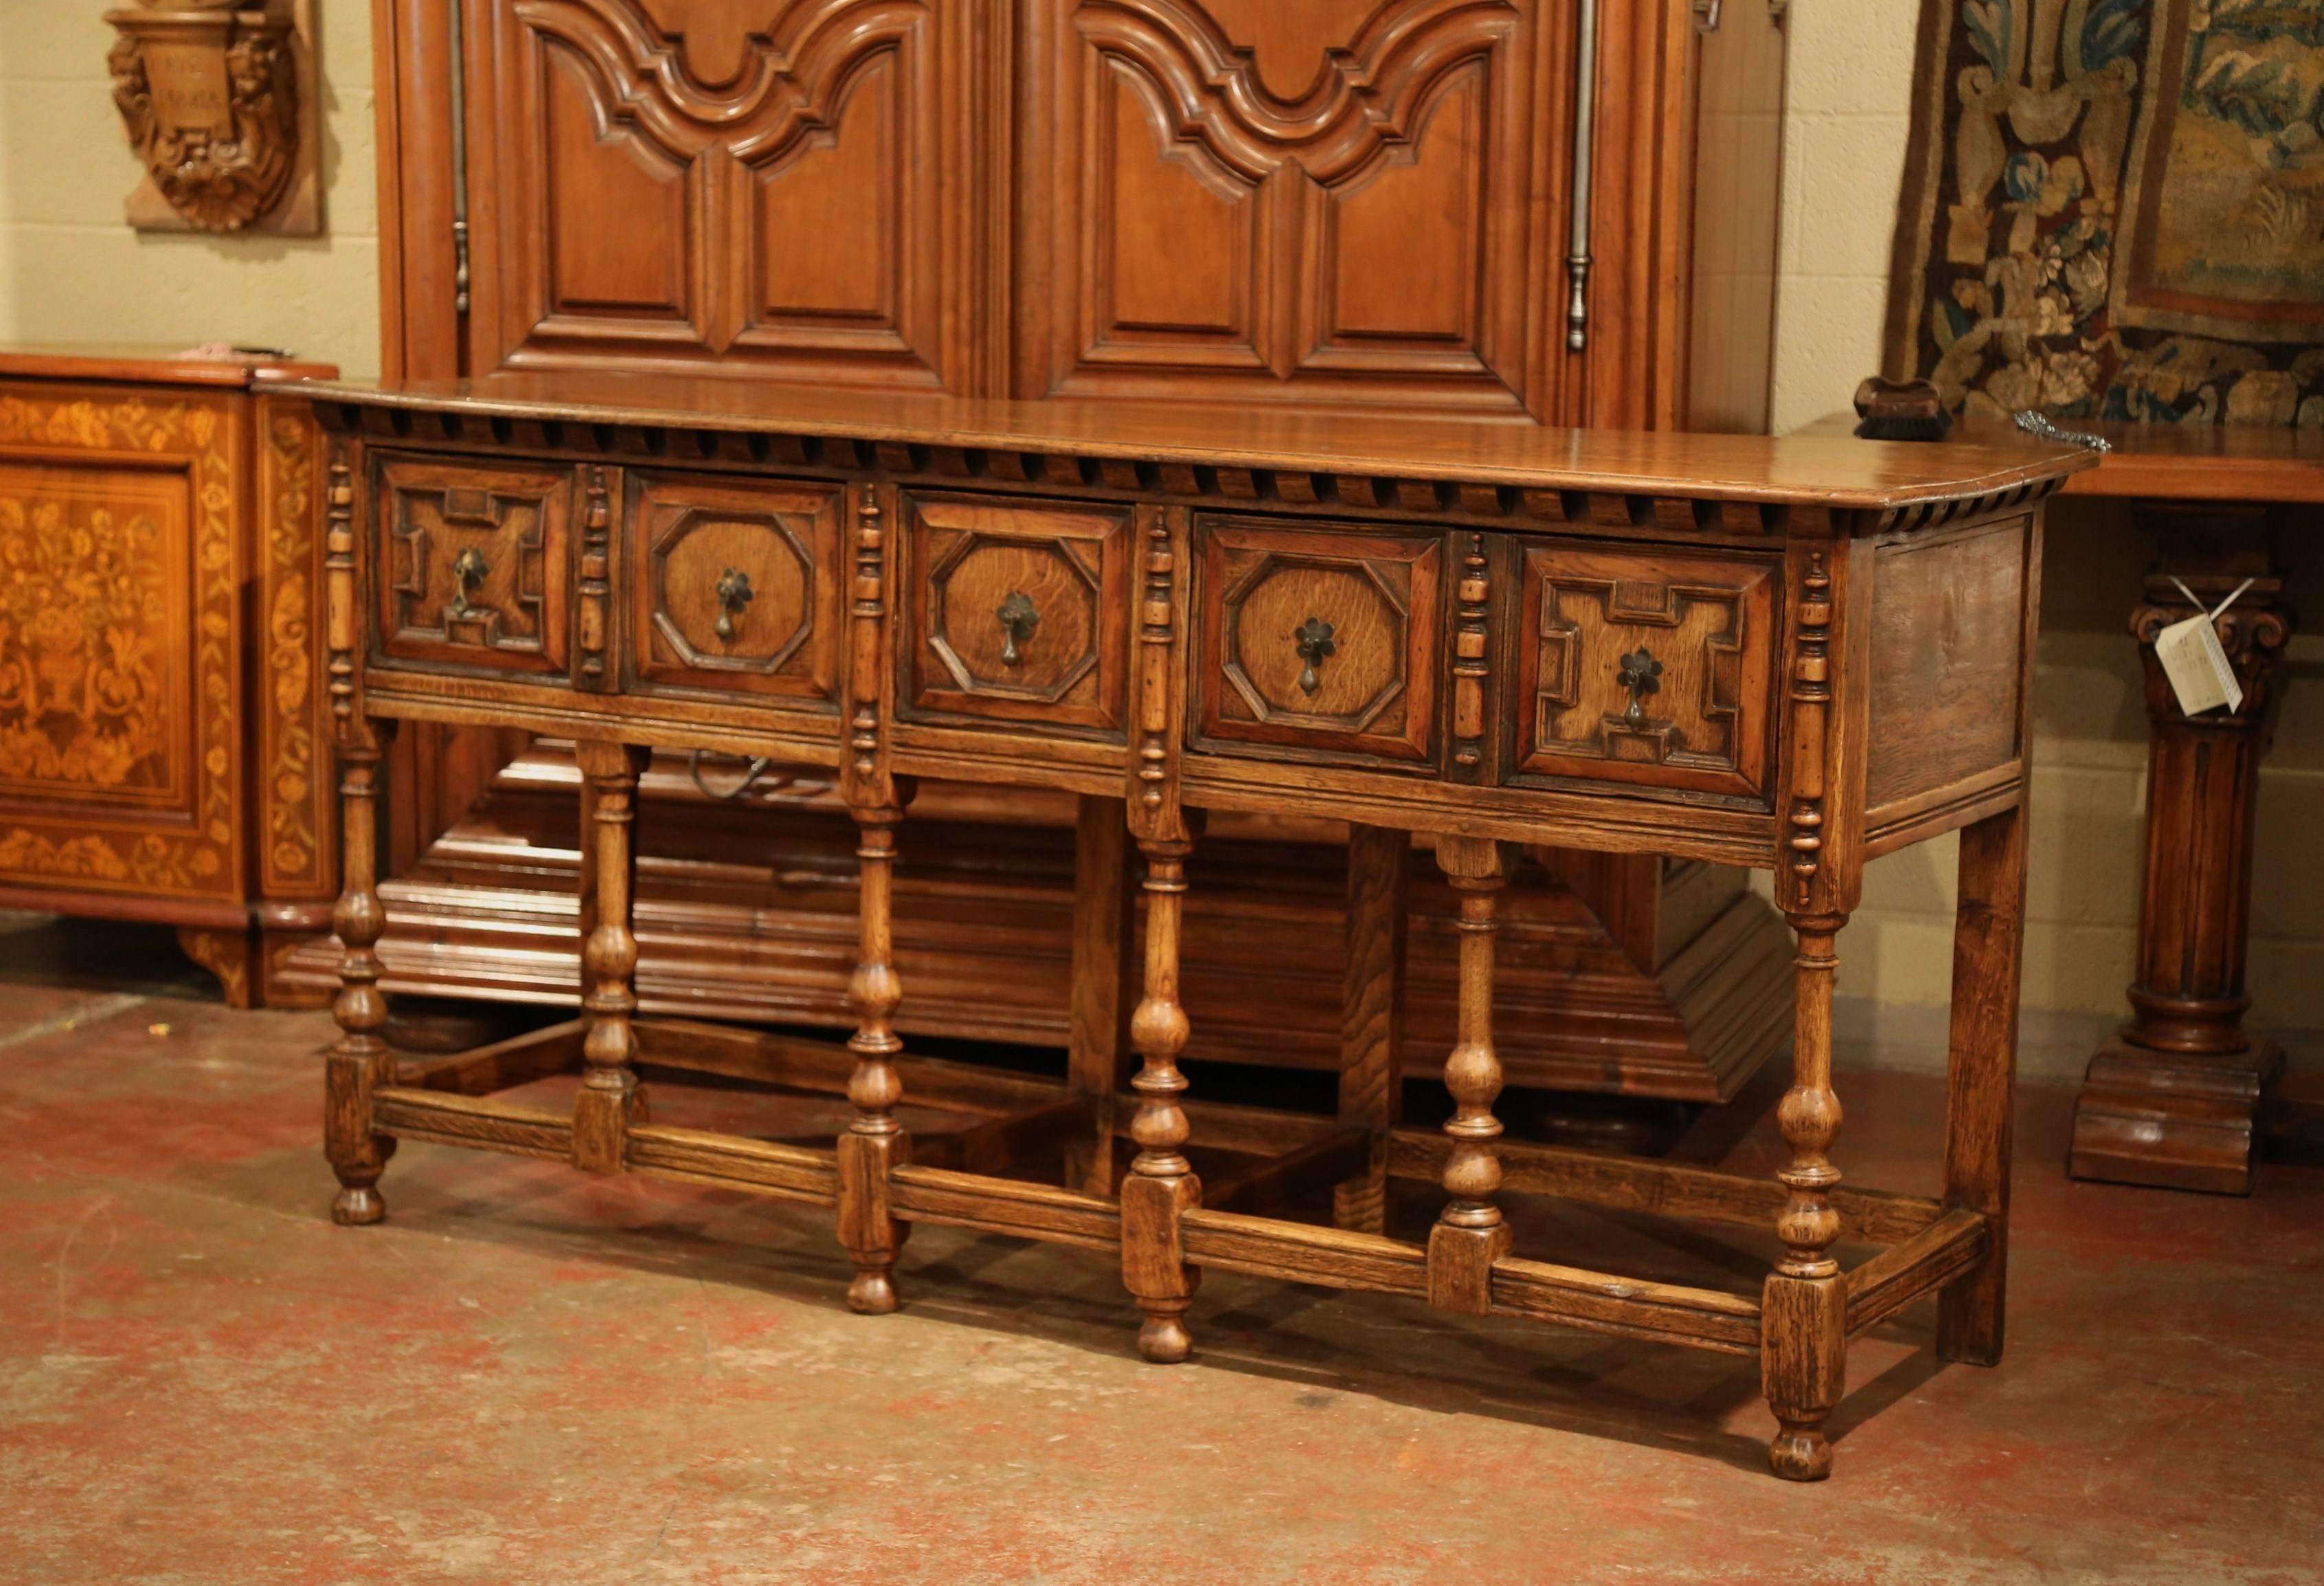 Jacobean 19th Century English Carved Chestnut and Oak Eight-Leg Console Table and Drawers